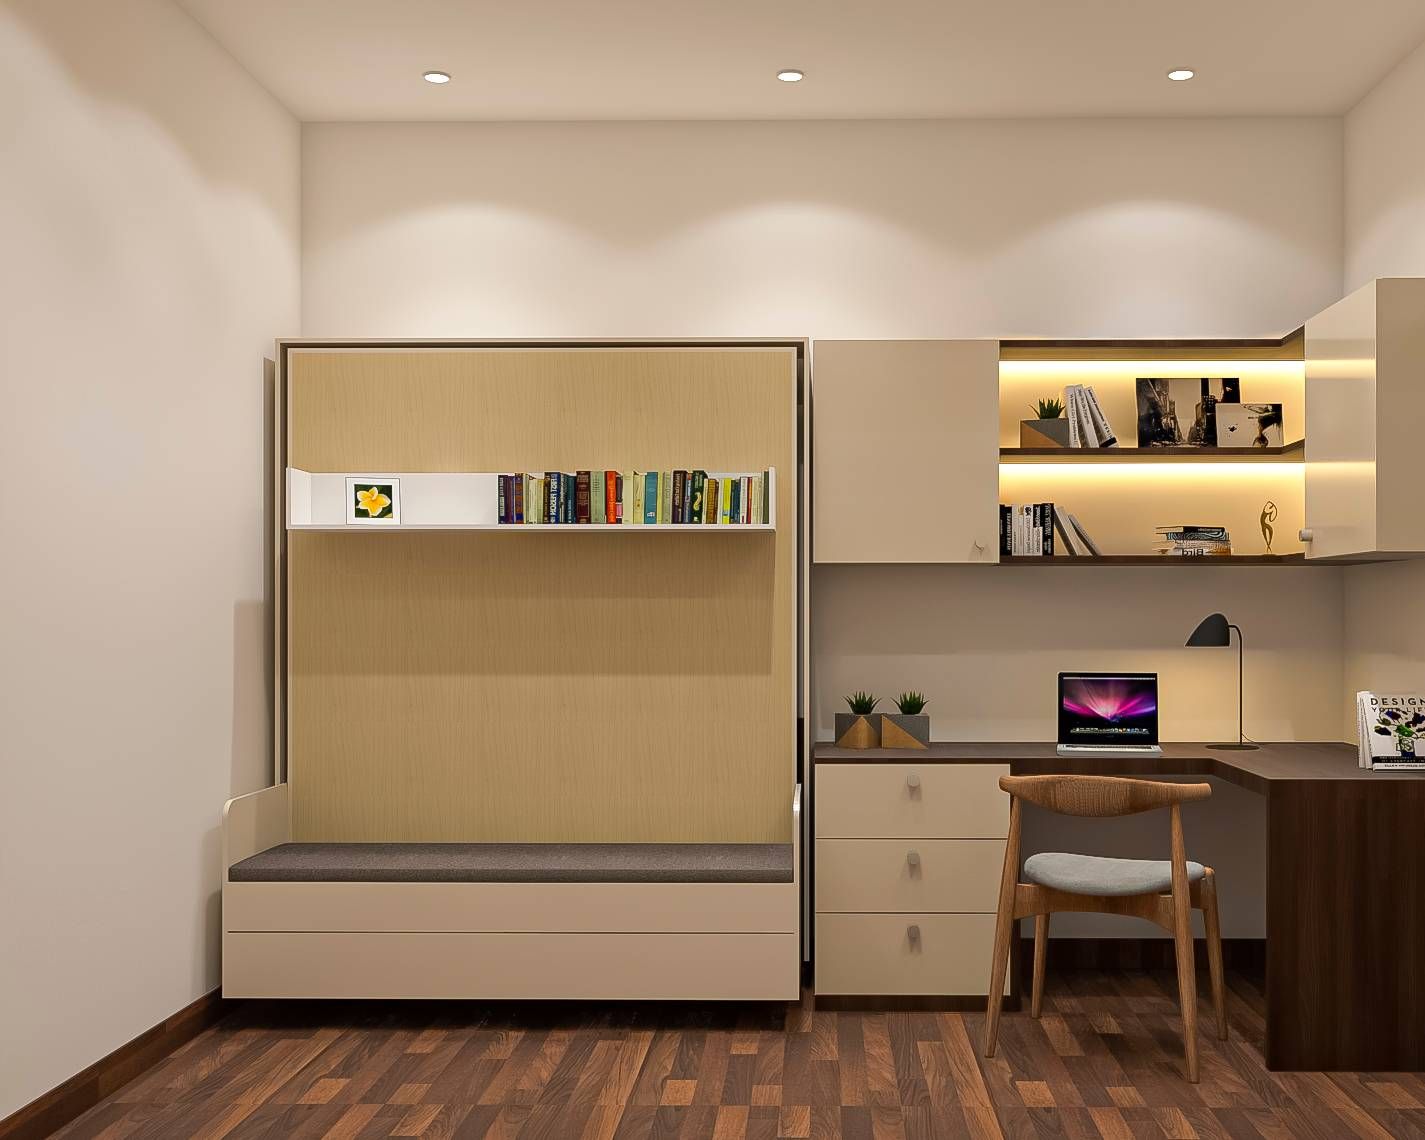 Modern Spacious Home Office Design With Overhead Storage Units